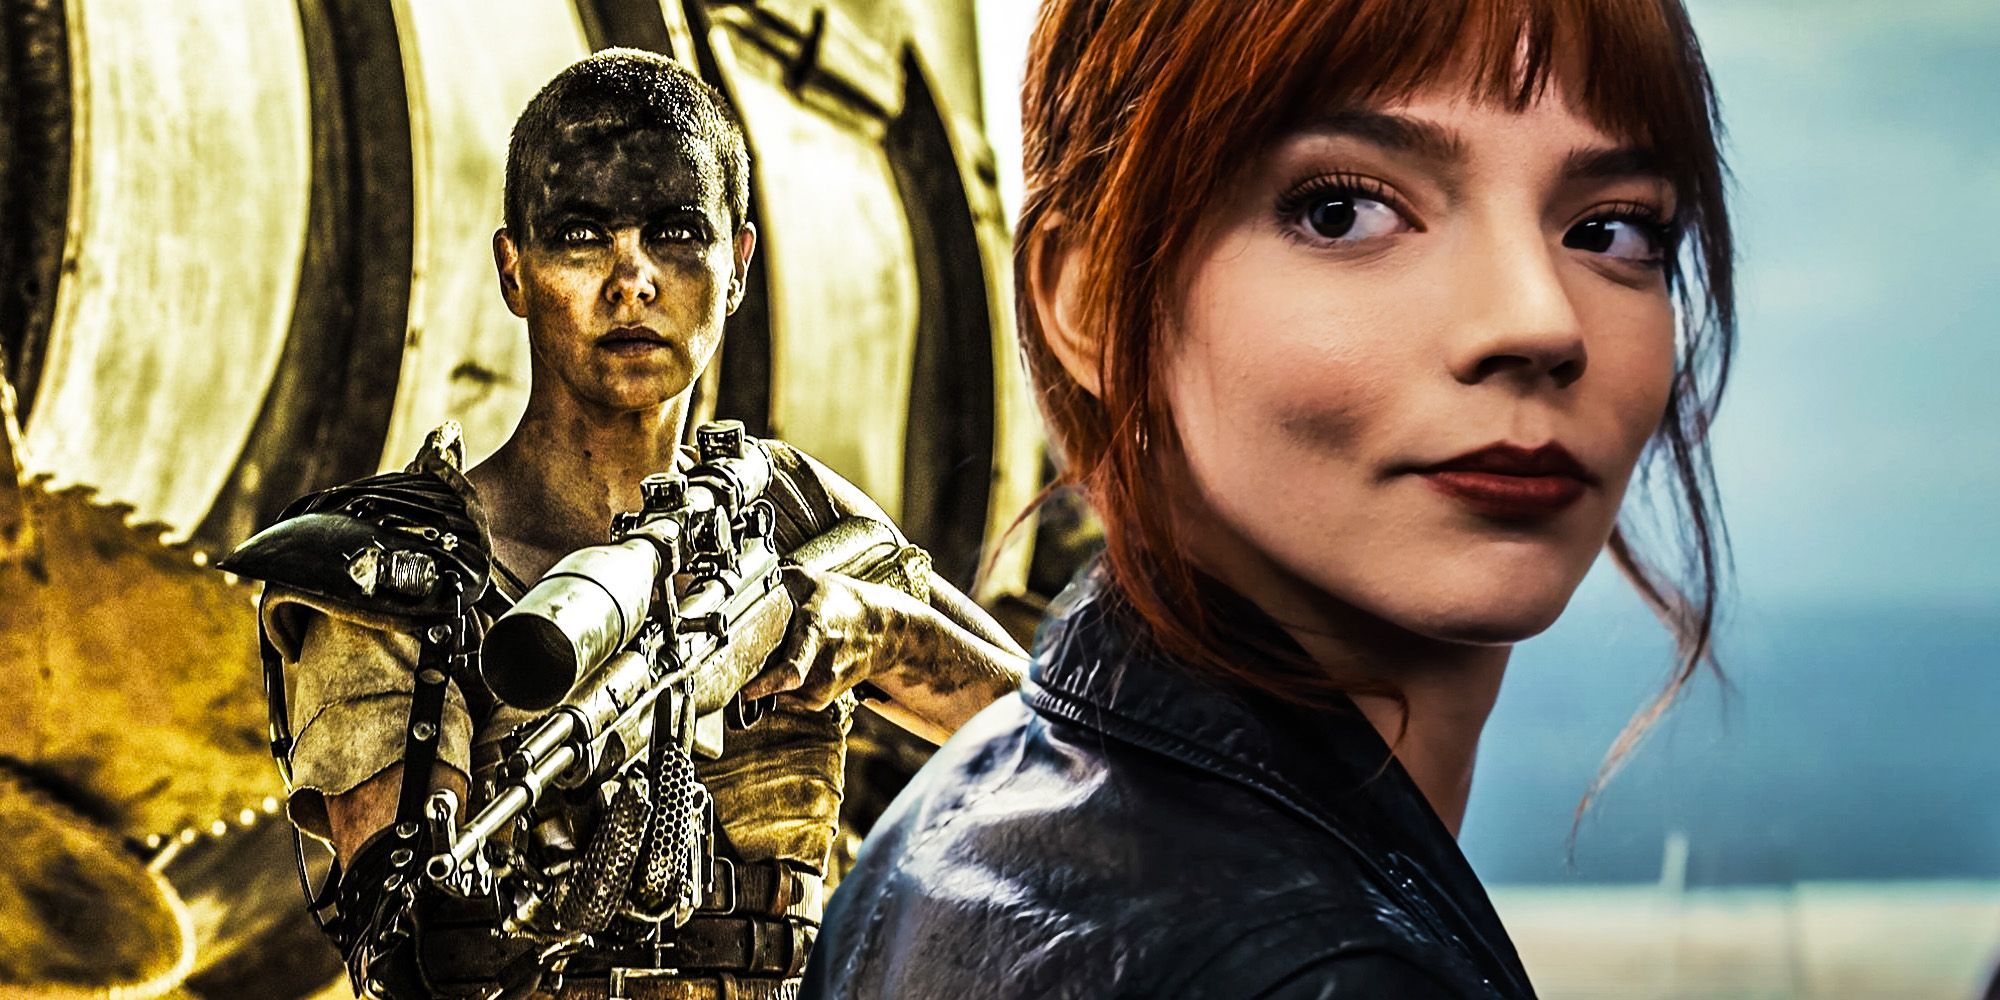 Composite image of Furiosa from Fury Road and Anya Taylor-Joy